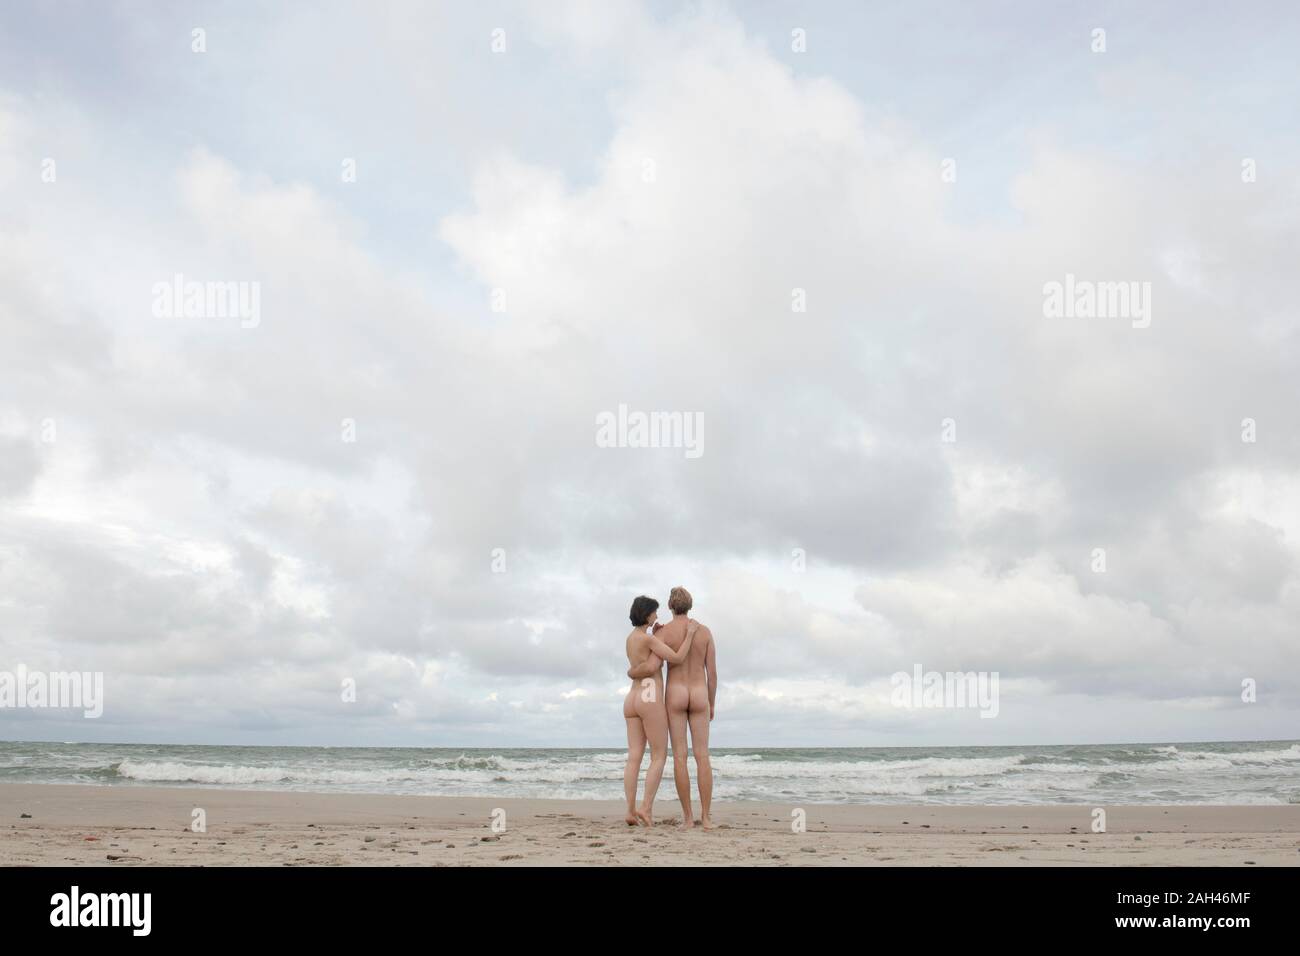 Nude couple standing on the beach, embracing Stock Photo